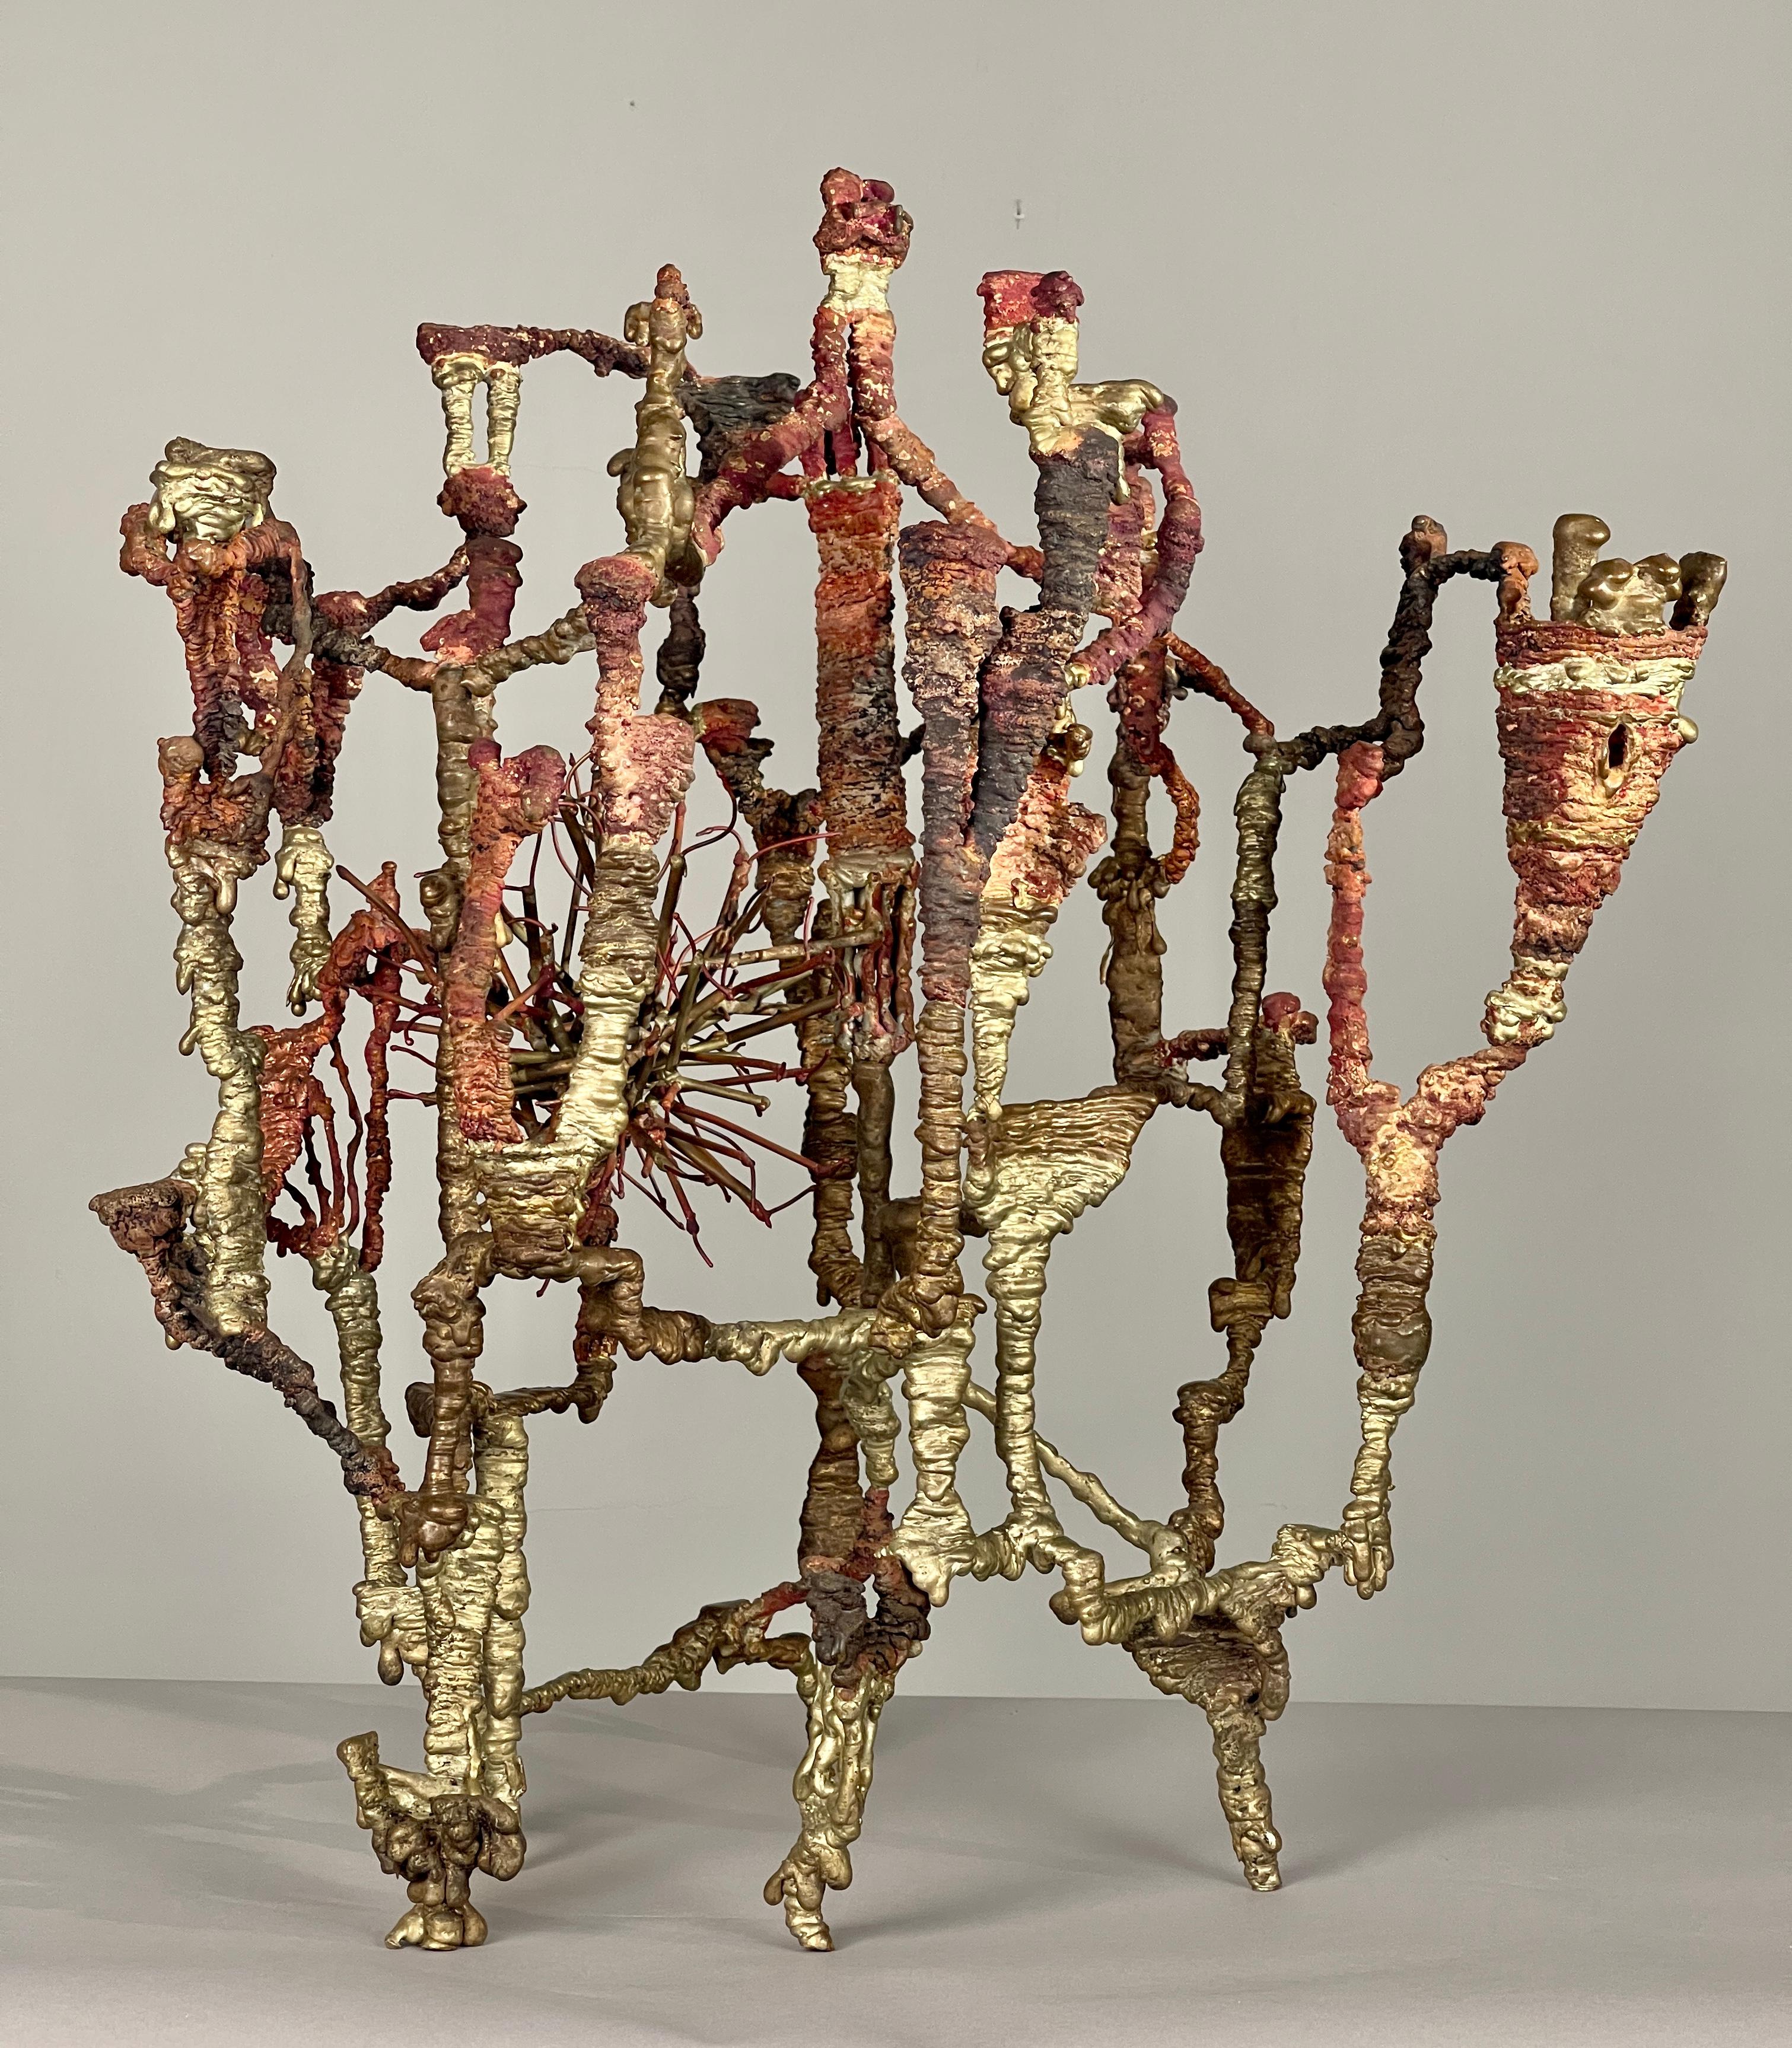 Ibram Lassaw
Symbiosis, 1960
Signed and dated at base
Silicon bronze
24 high x 20 1/2 wide x 18 inches deep

Provenance:
Kootz Gallery, New York
Fogg Museum, Cambridge (acquired from the above in 1960)
Private Collection (acquired from the above in